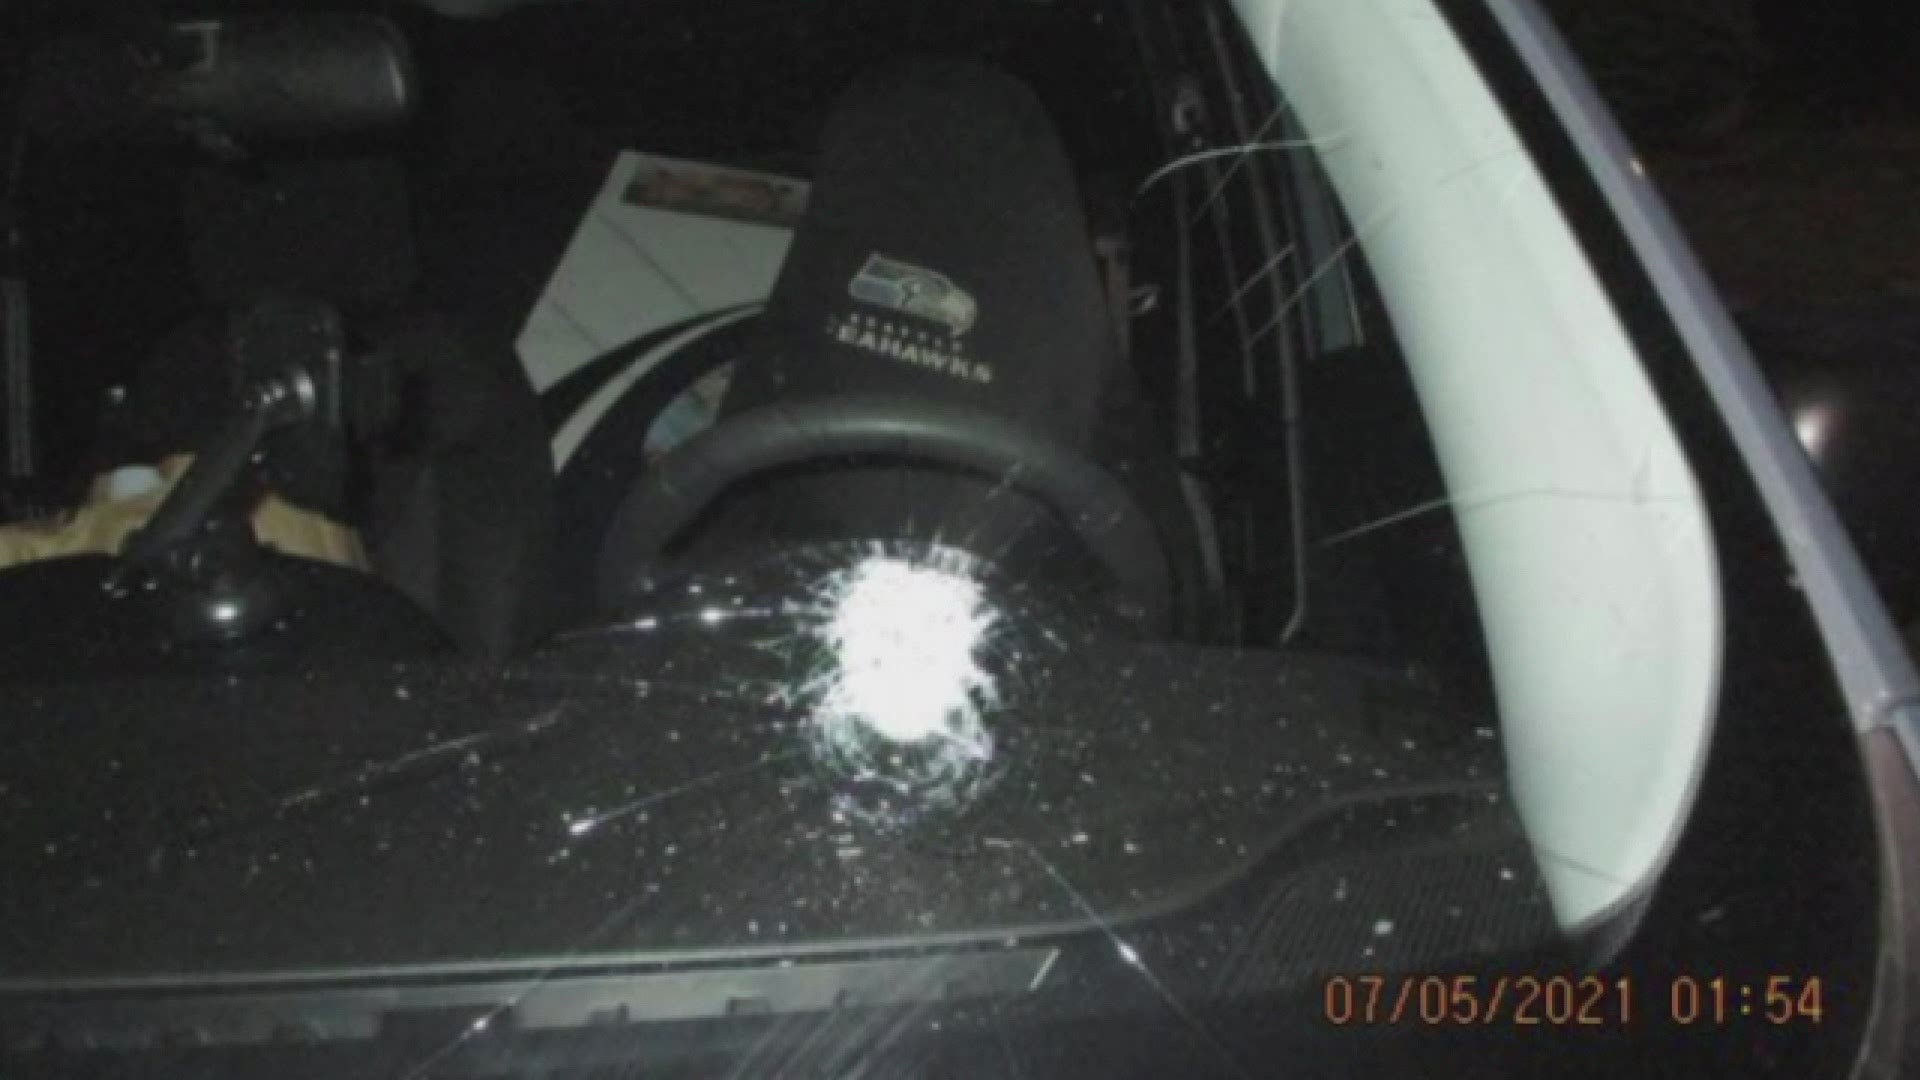 A 35-year-old man was arrested Monday after throwing chunks of concrete at vehicles traveling on I-5 near Federal Way.